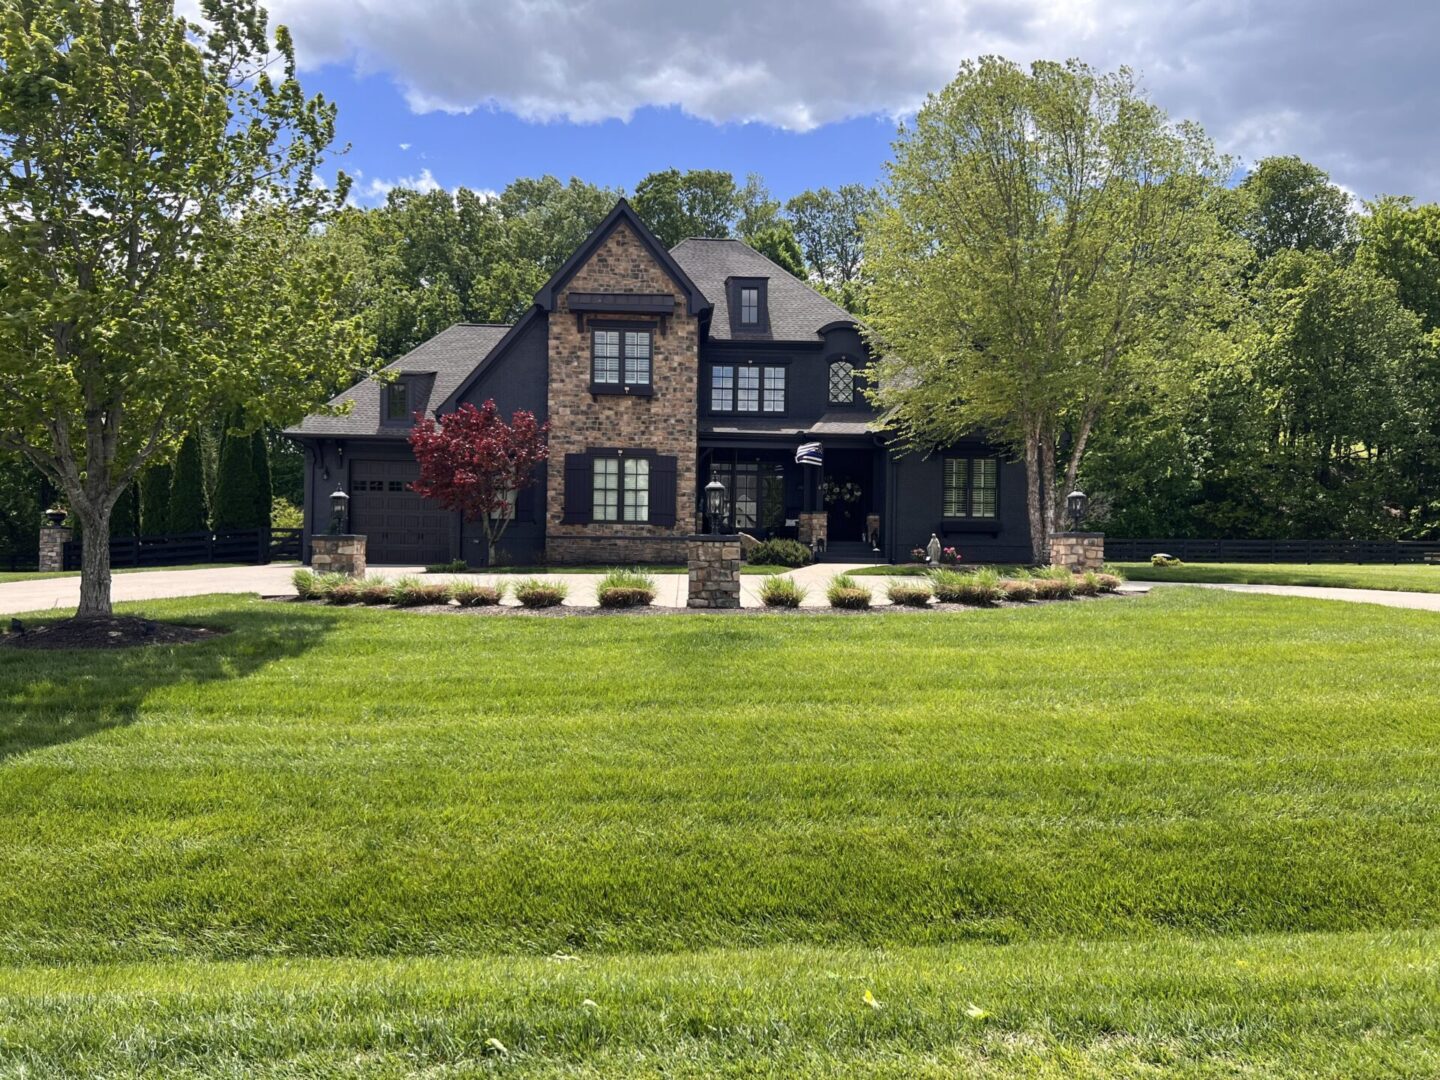 A large house with a lawn in front of it.